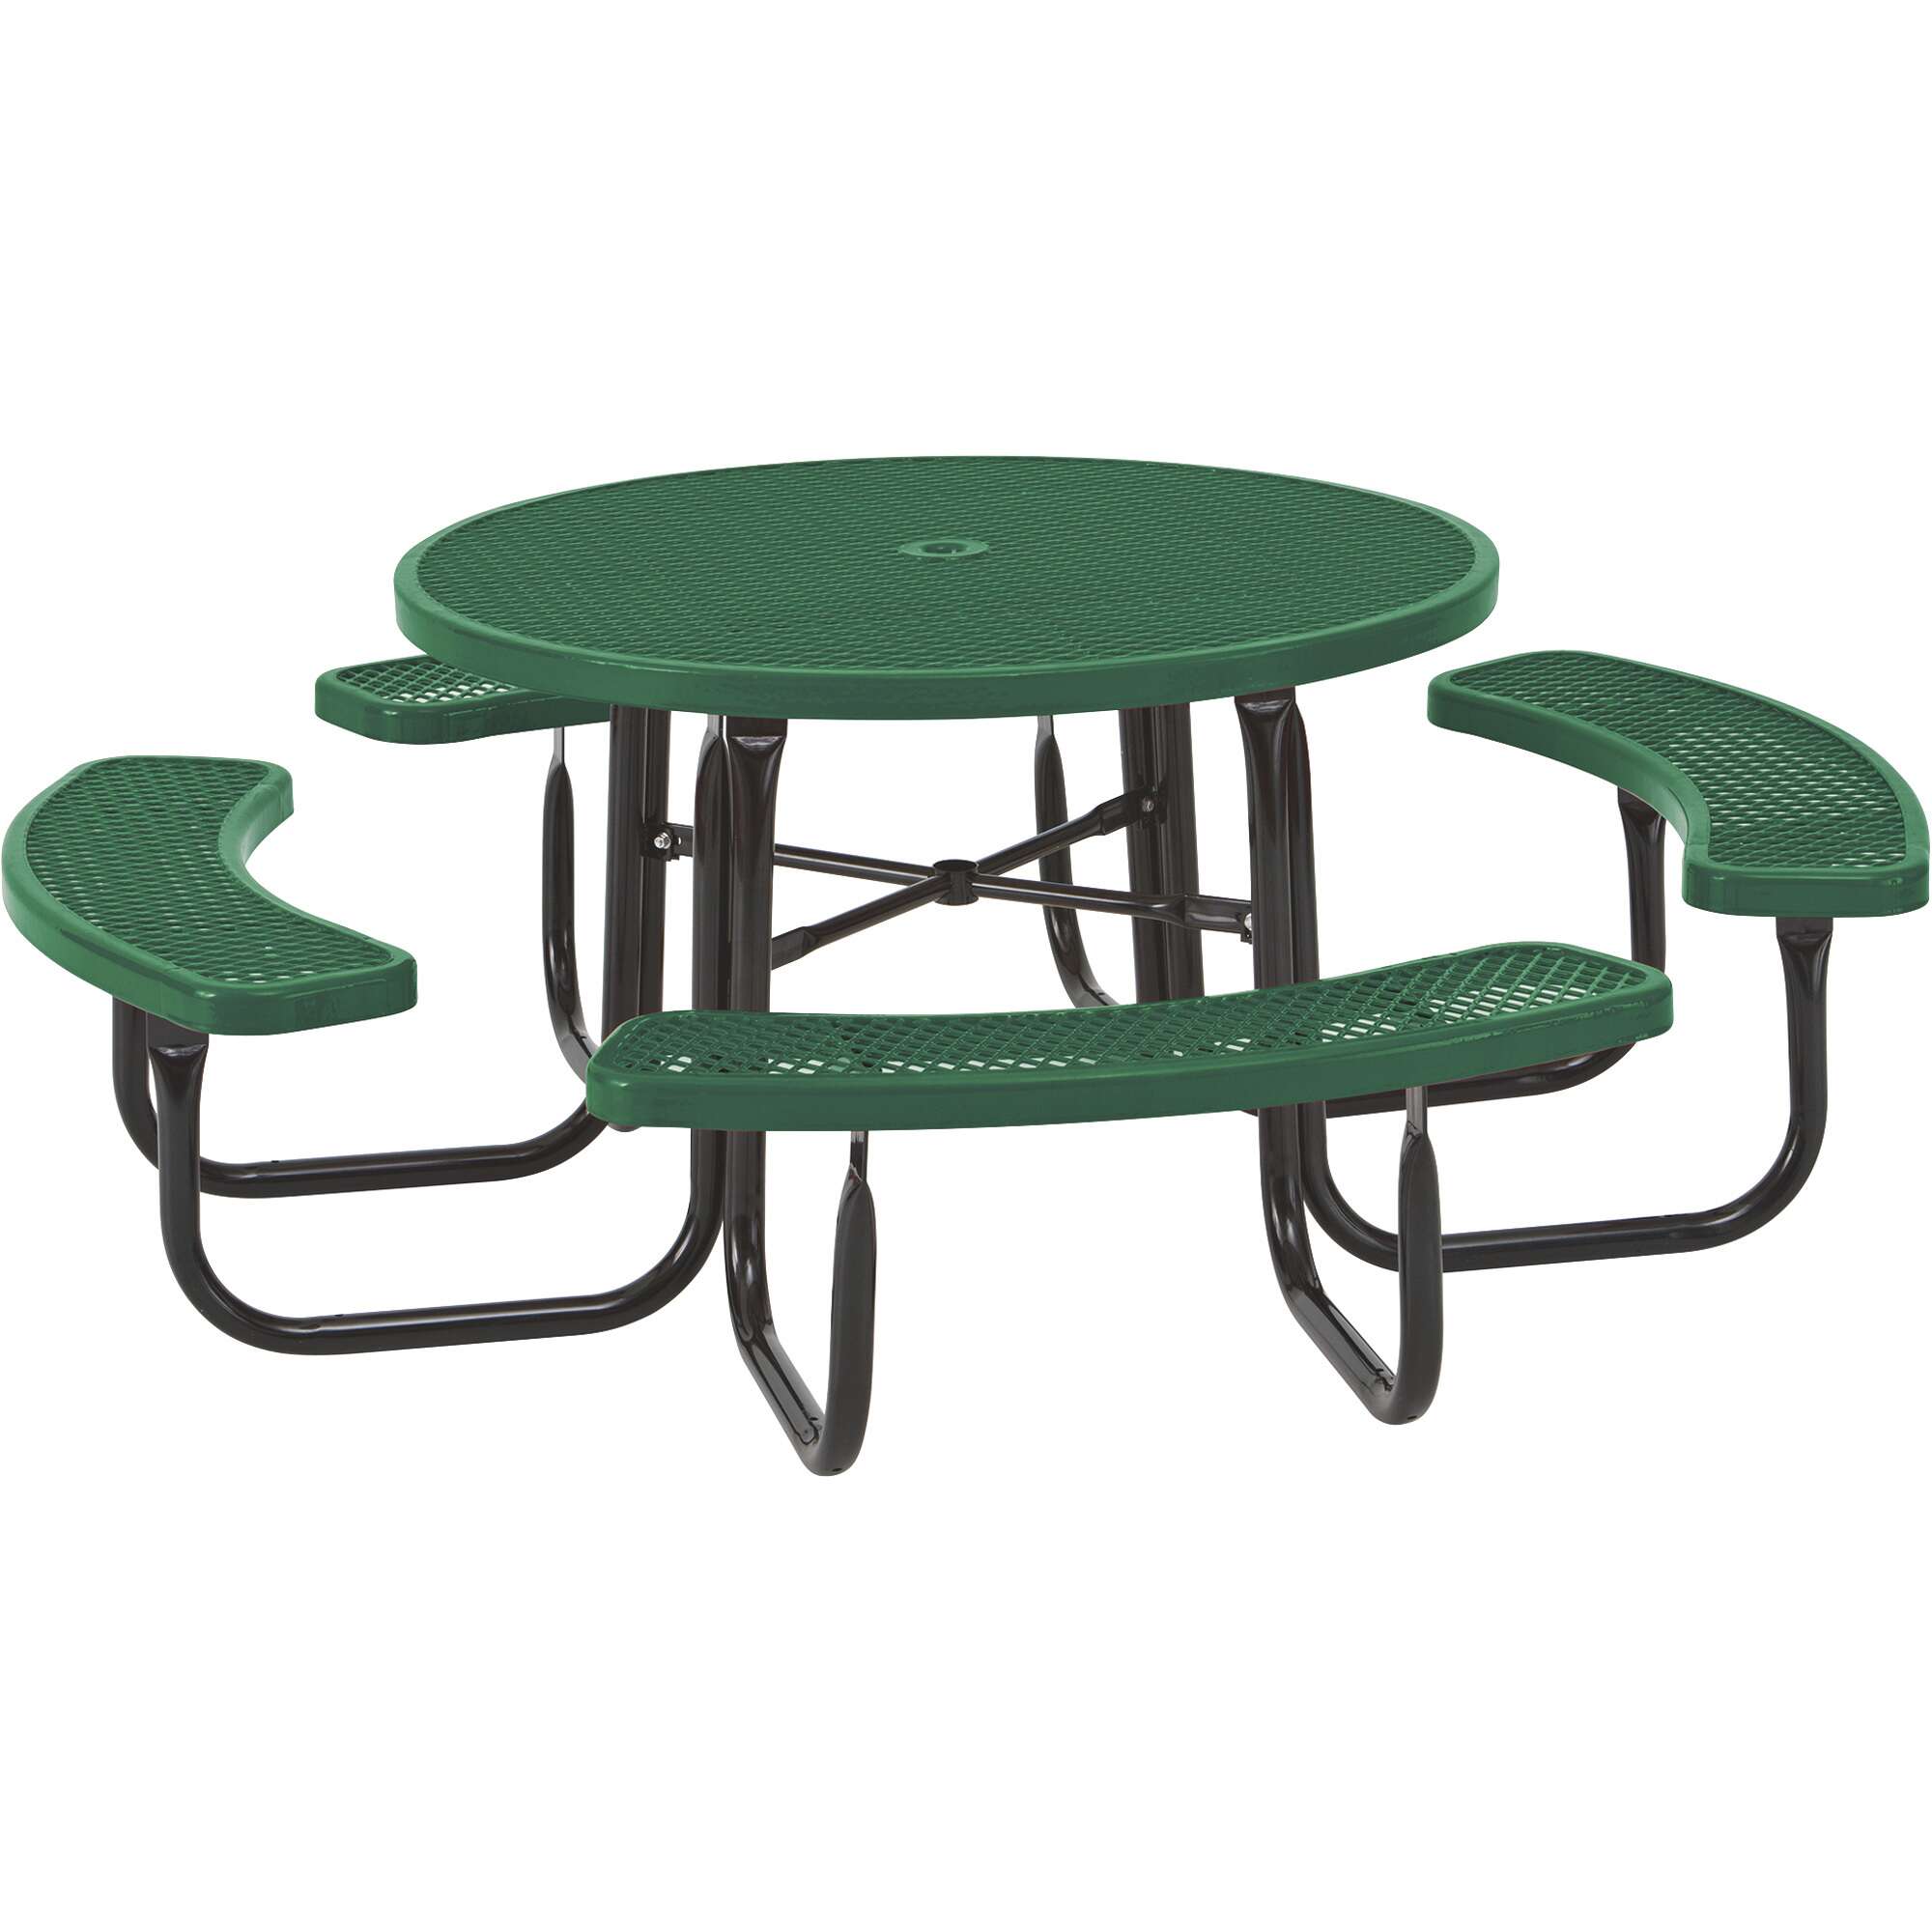 UltraSite 4Seat 46in Diamond Pattern Round Picnic Table